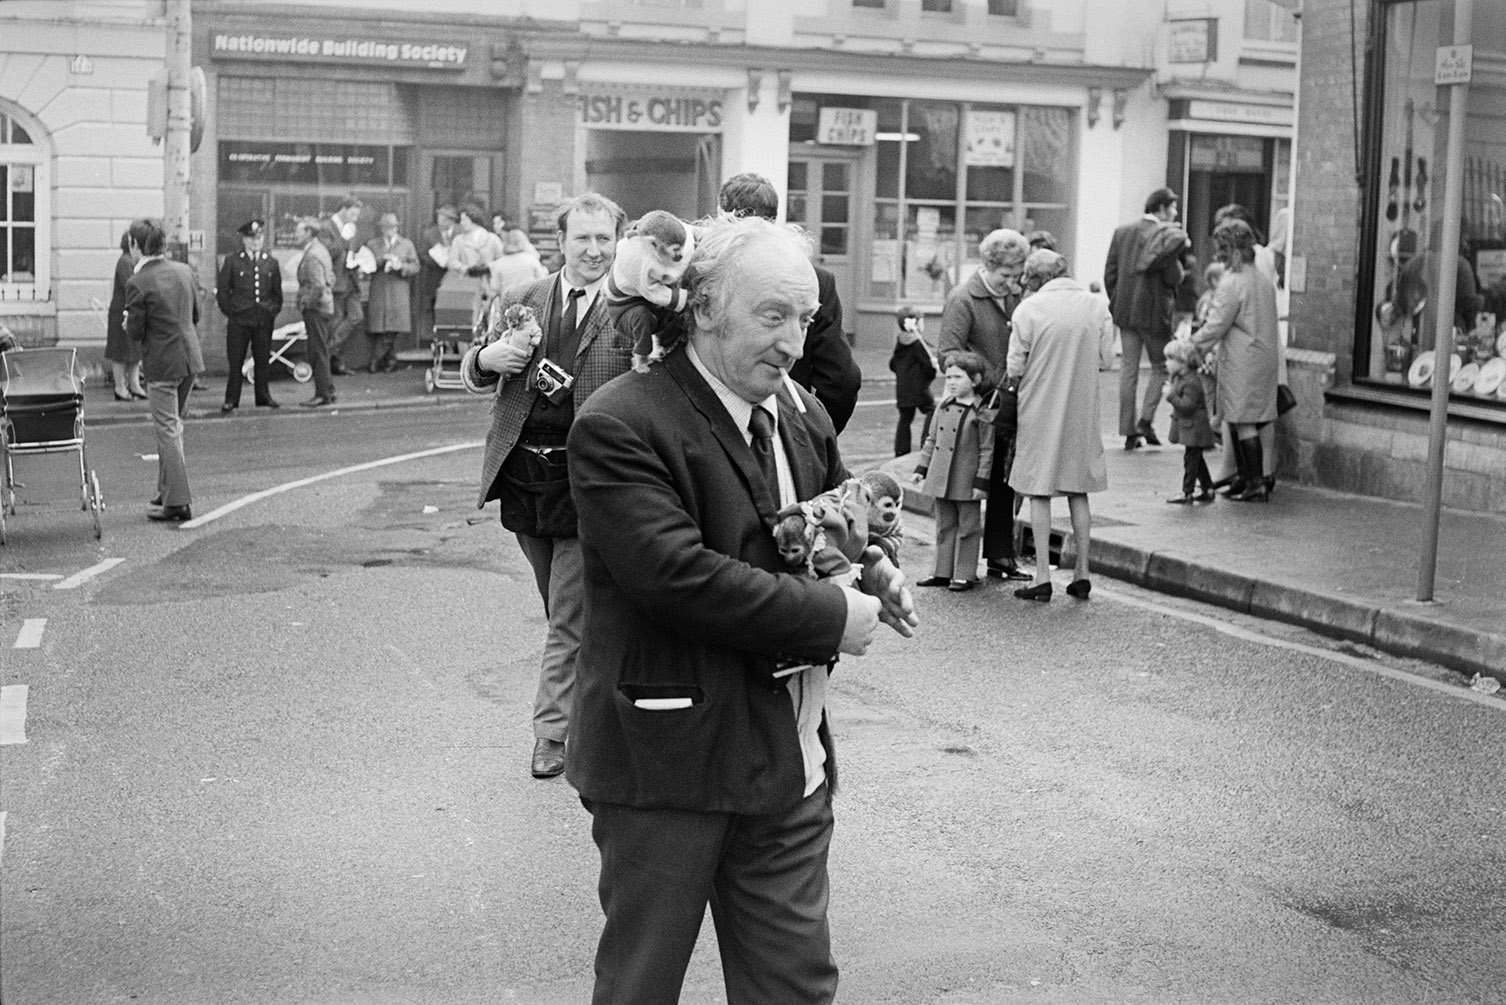 Two men carrying monkeys at Torrington May Fair. One of them is smoking a cigarette and the other has a camera. The Nationwide Building Society and Fish & Chip shop can be seen in the background.